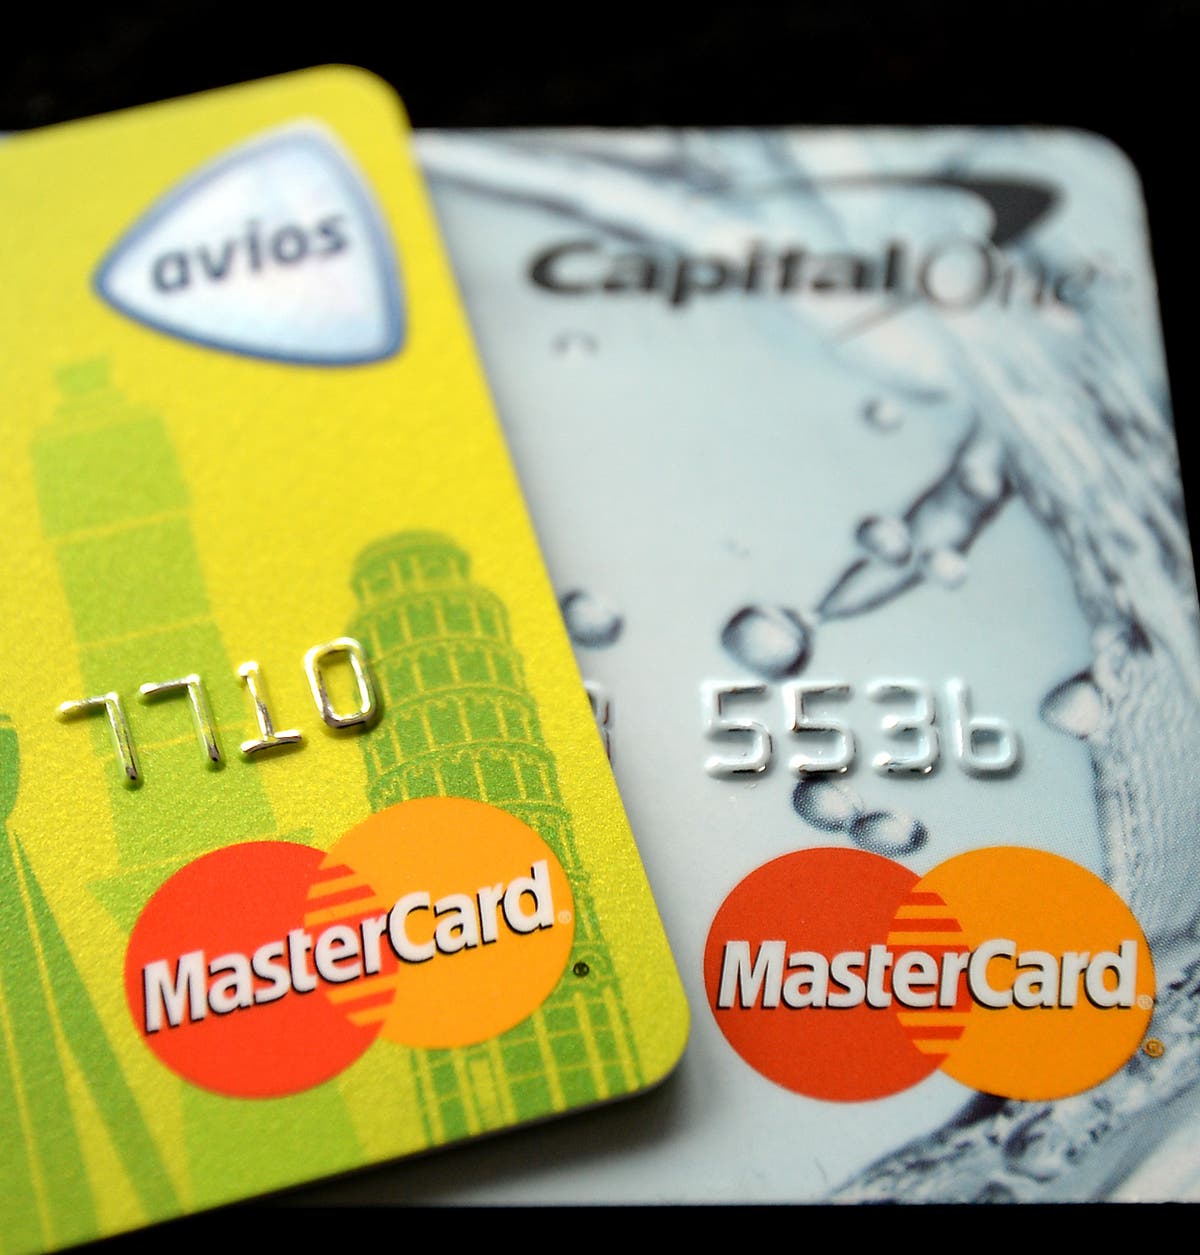 Mastercard is Phasing Out Magnetic Stripes